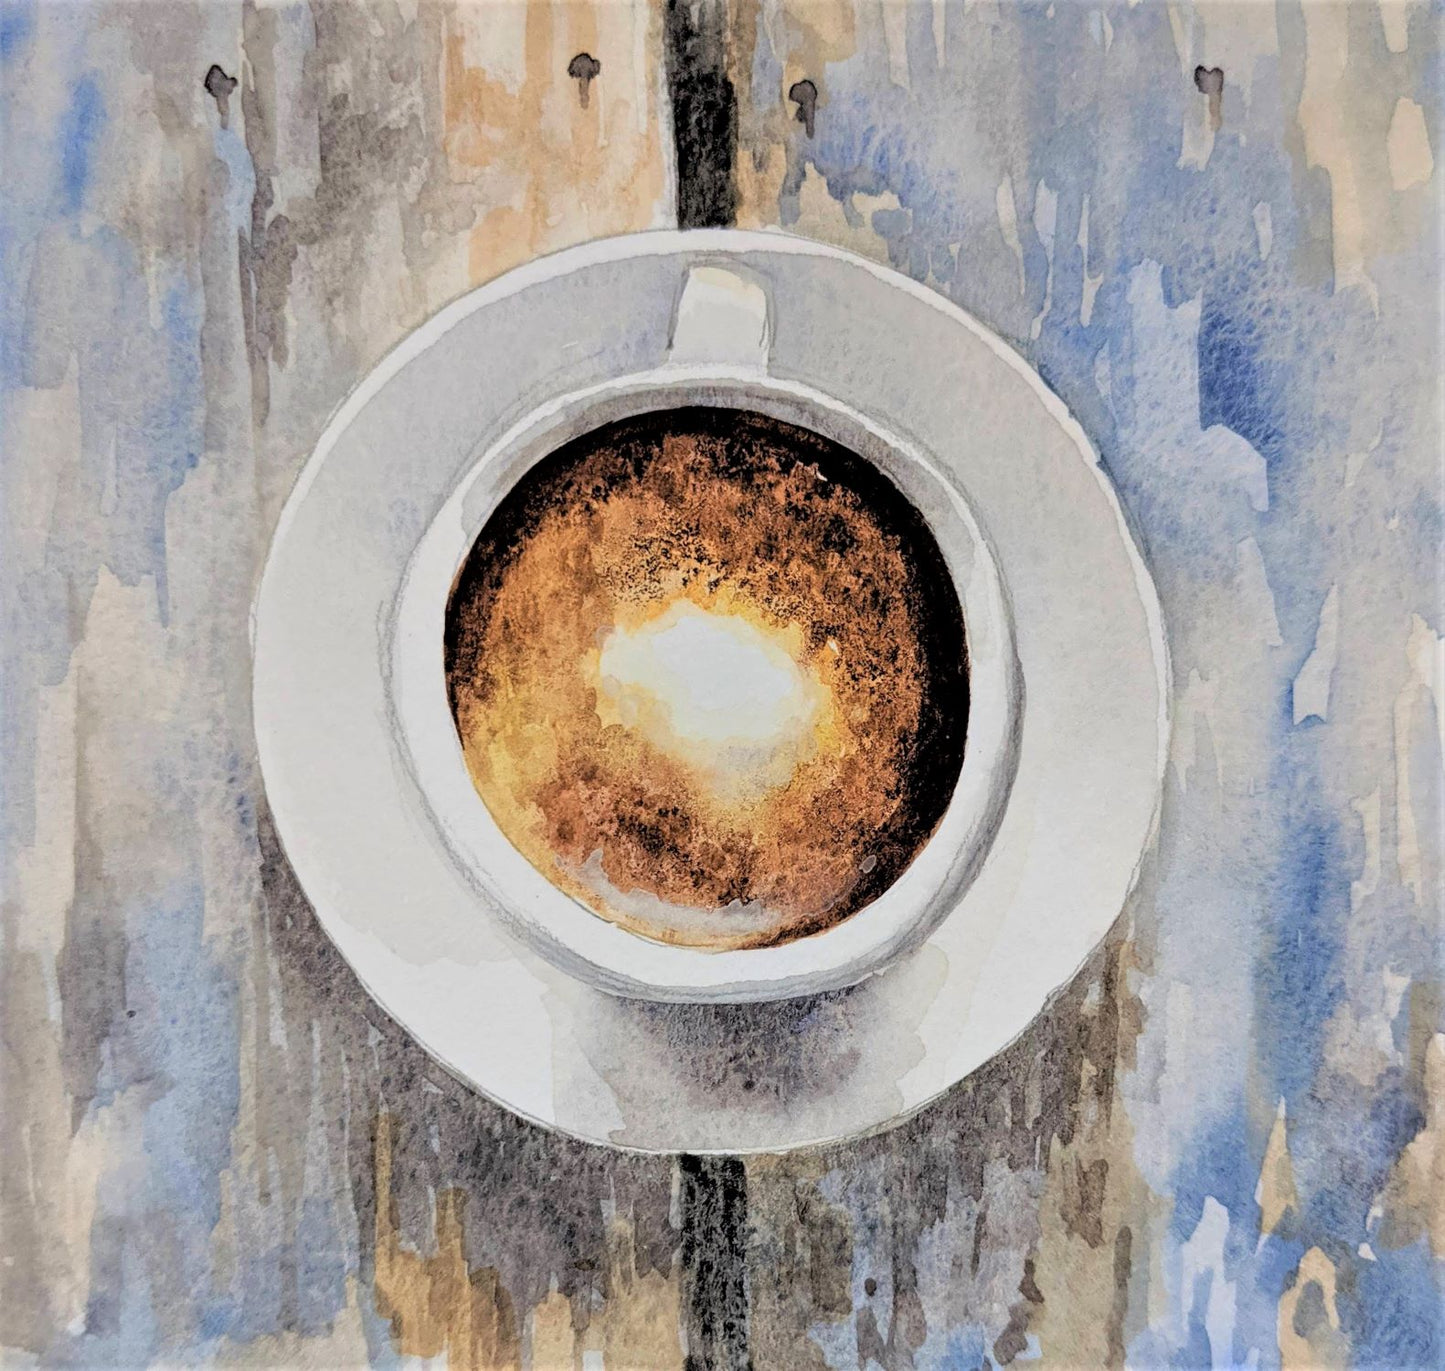 Cream in my coffee watercolor painting